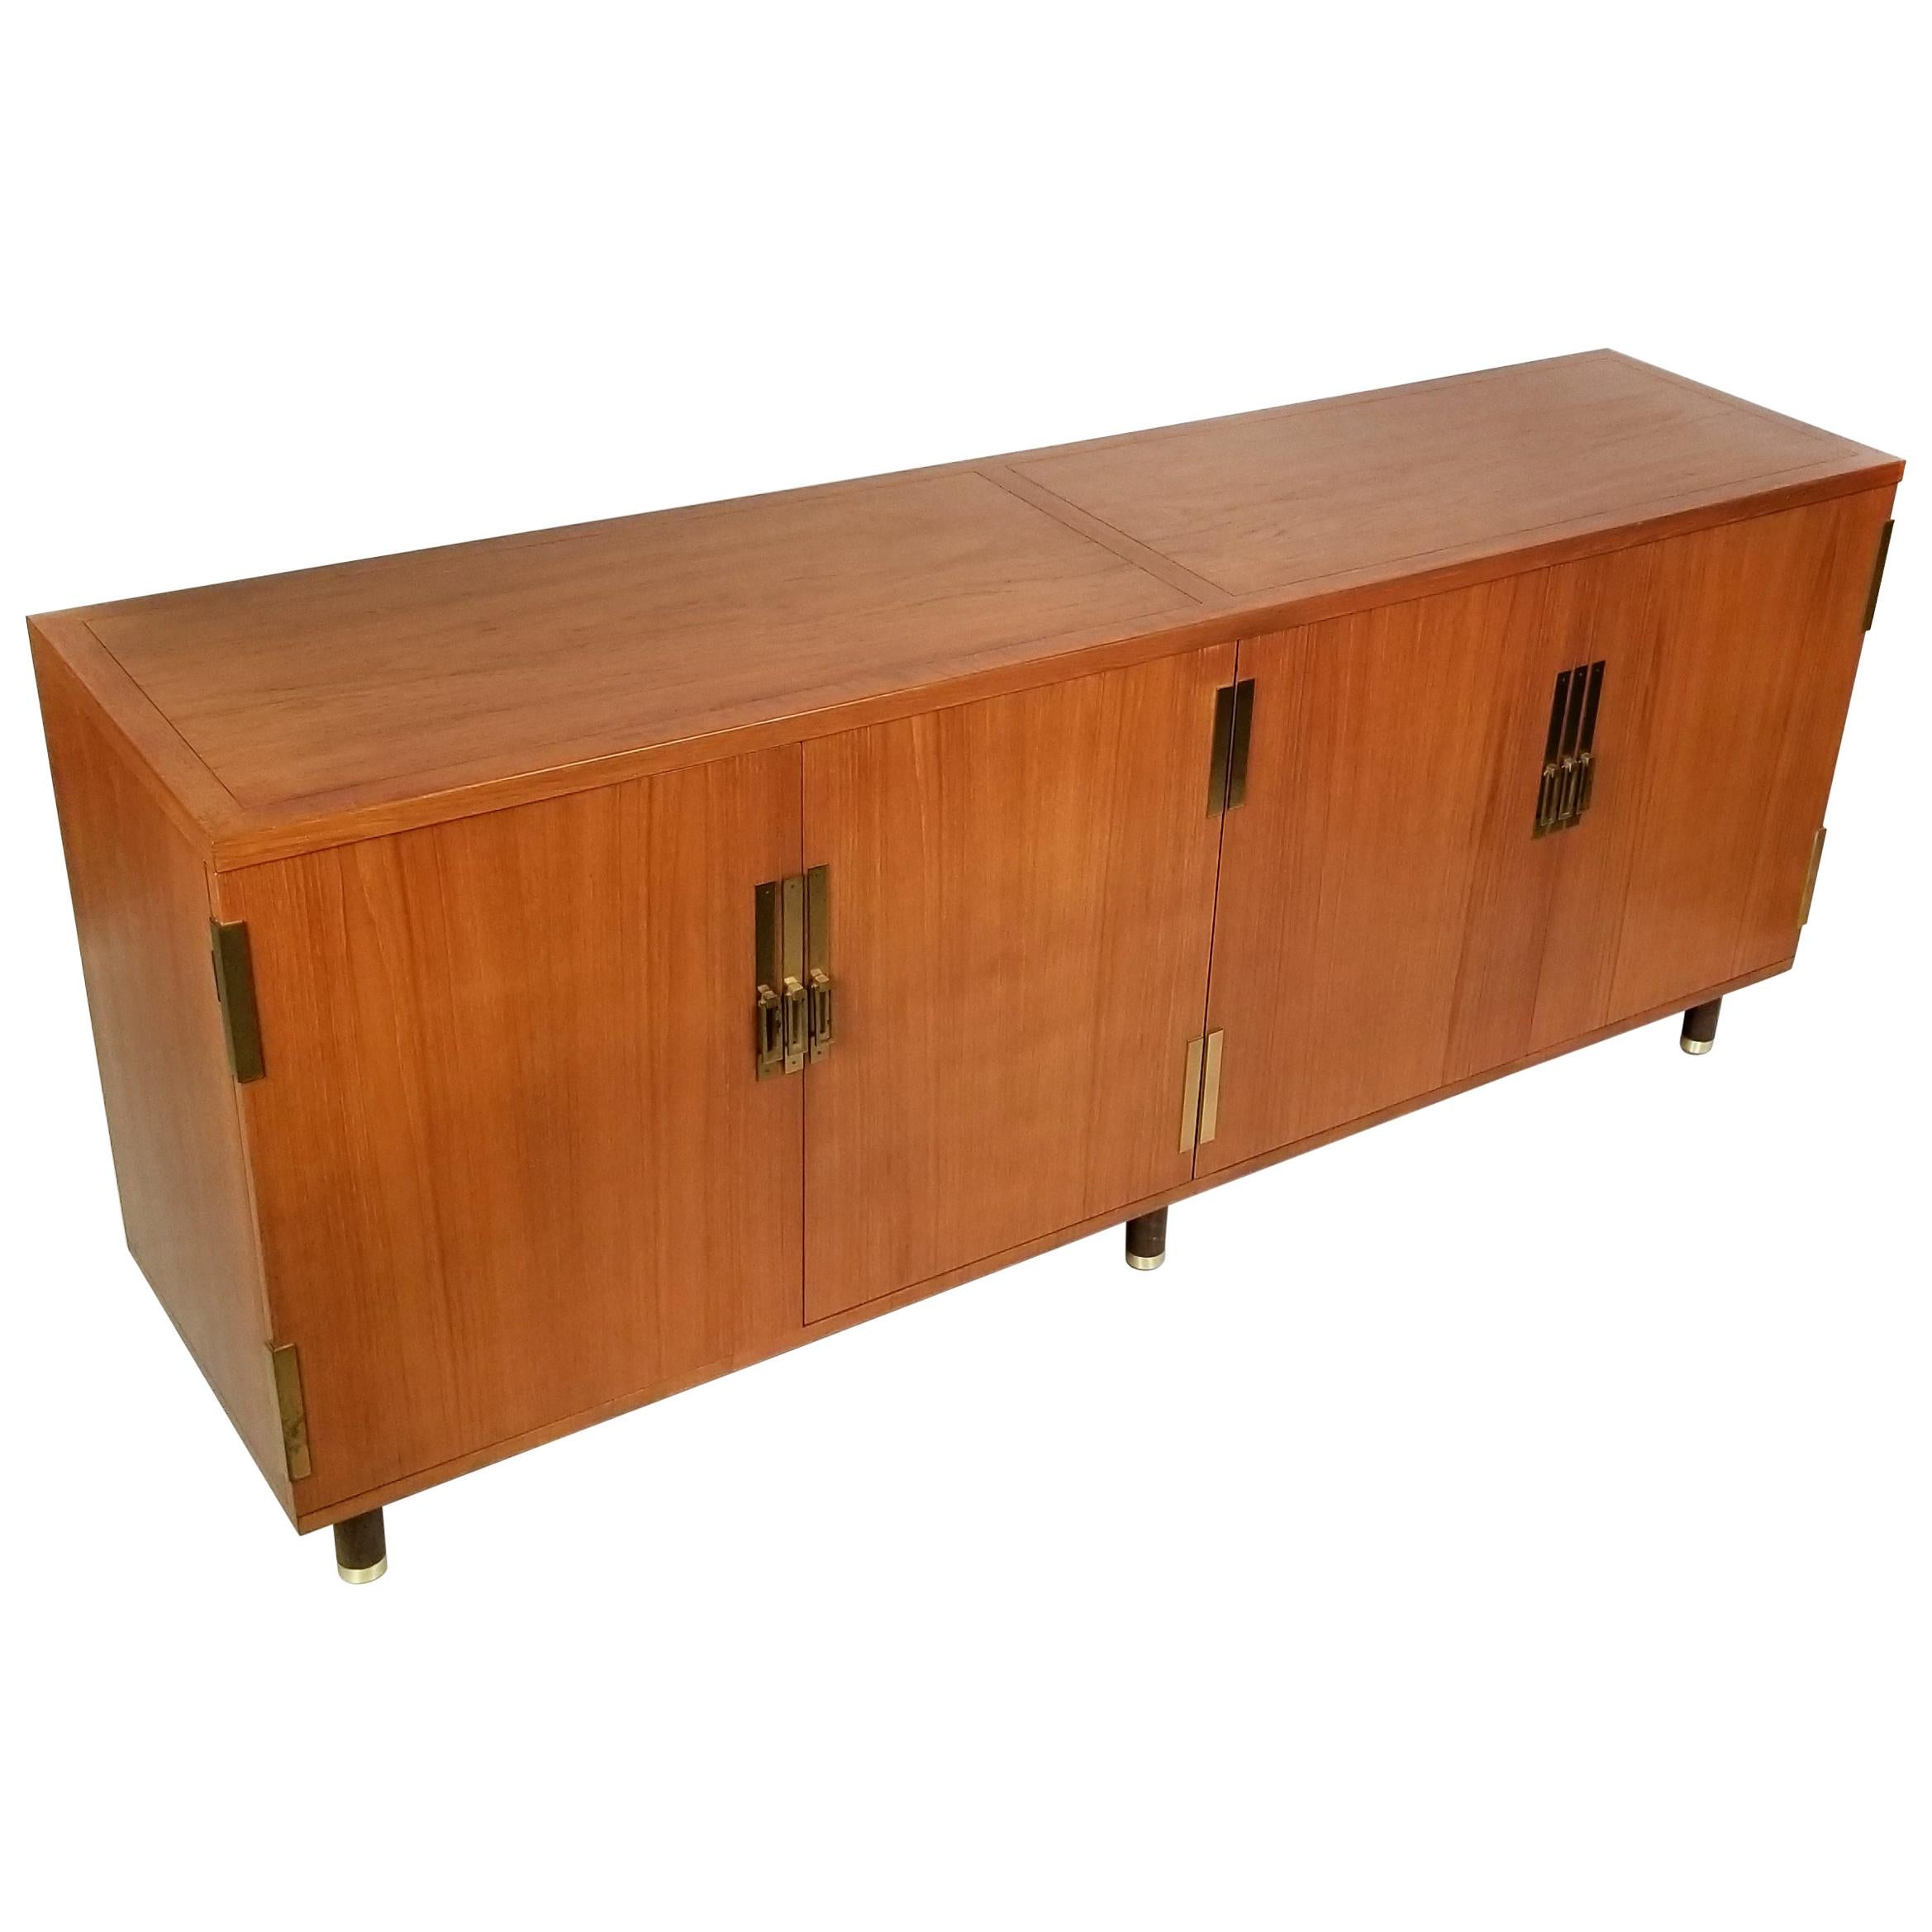 Credenza designed by Michael Taylor for Baker